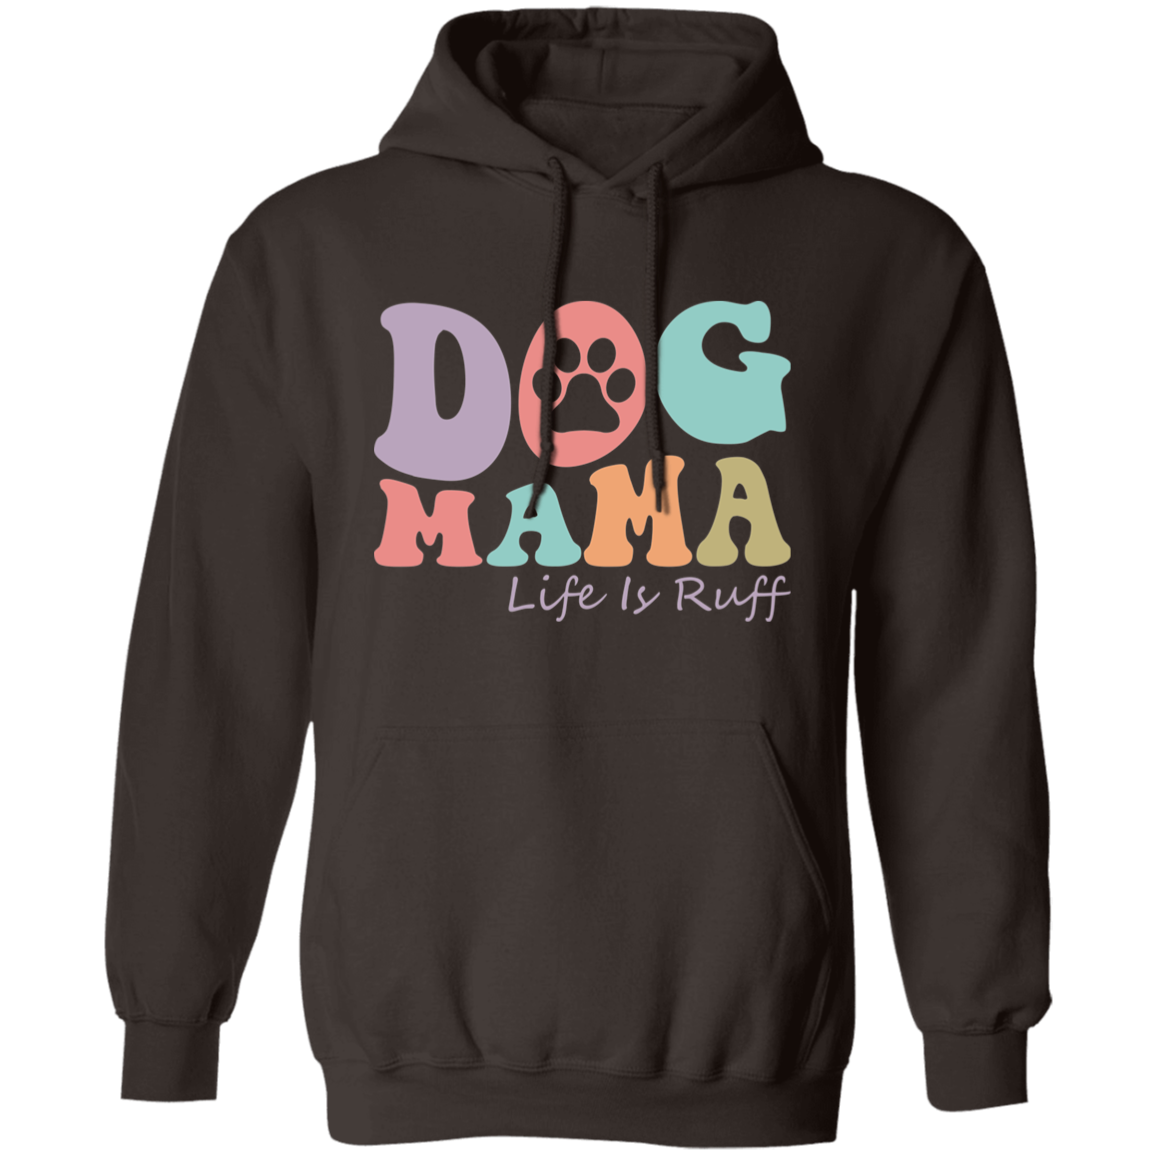 Dog Mama Life is Ruff Rescue Pullover Hoodie Hooded Sweatshirt